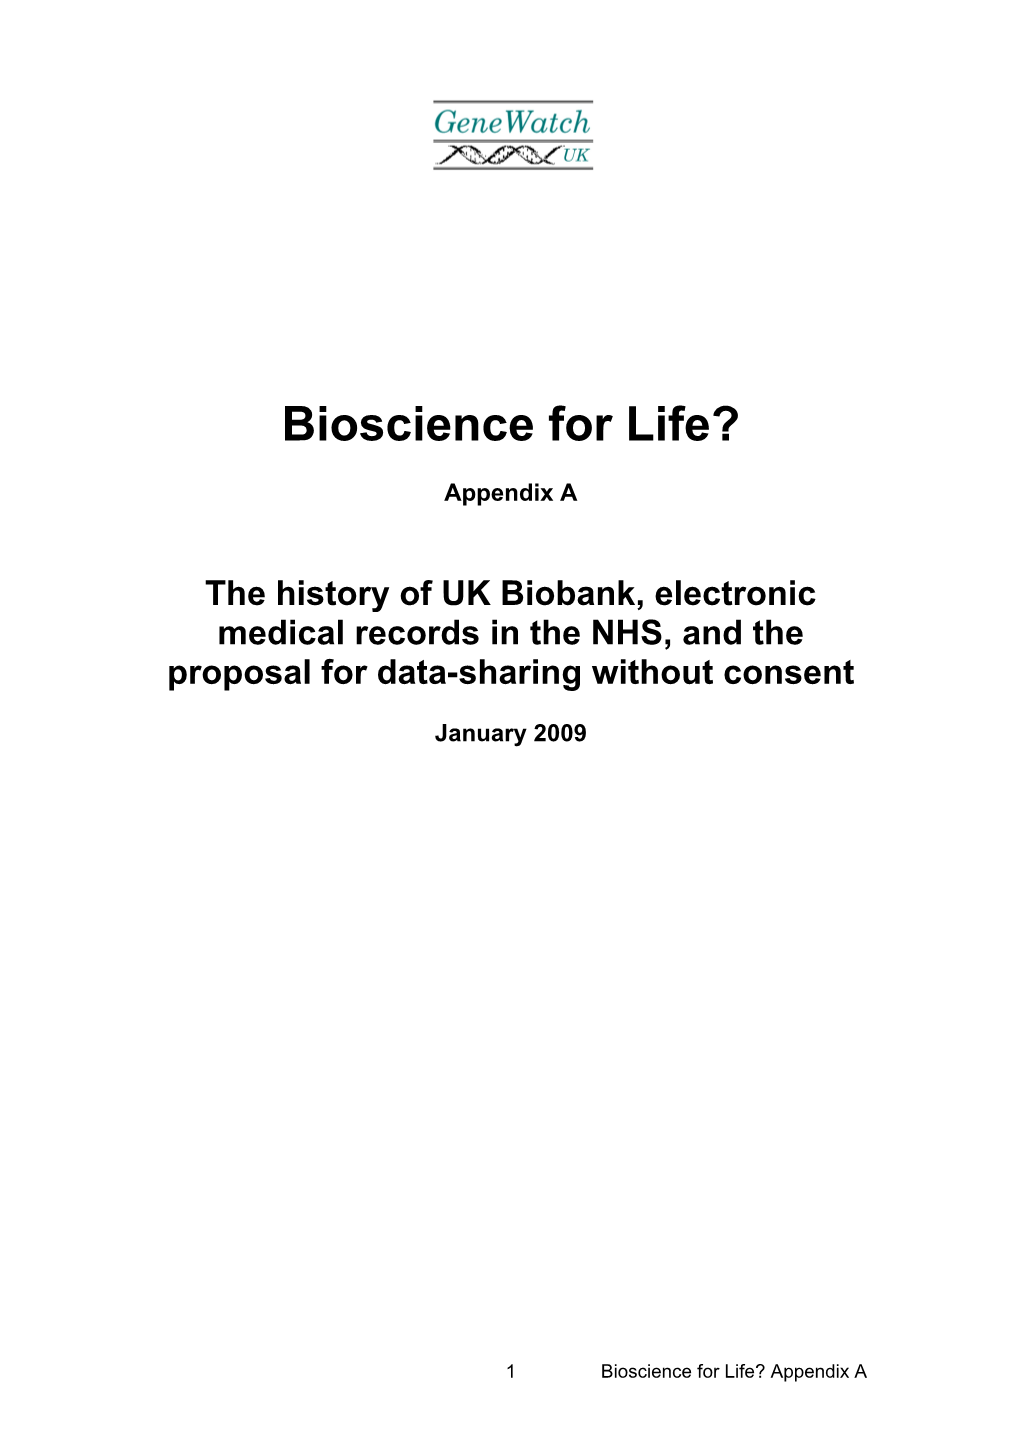 History of UK Biobank, Electronic Medical Records in the NHS, and the Proposal for Data-Sharing Without Consent